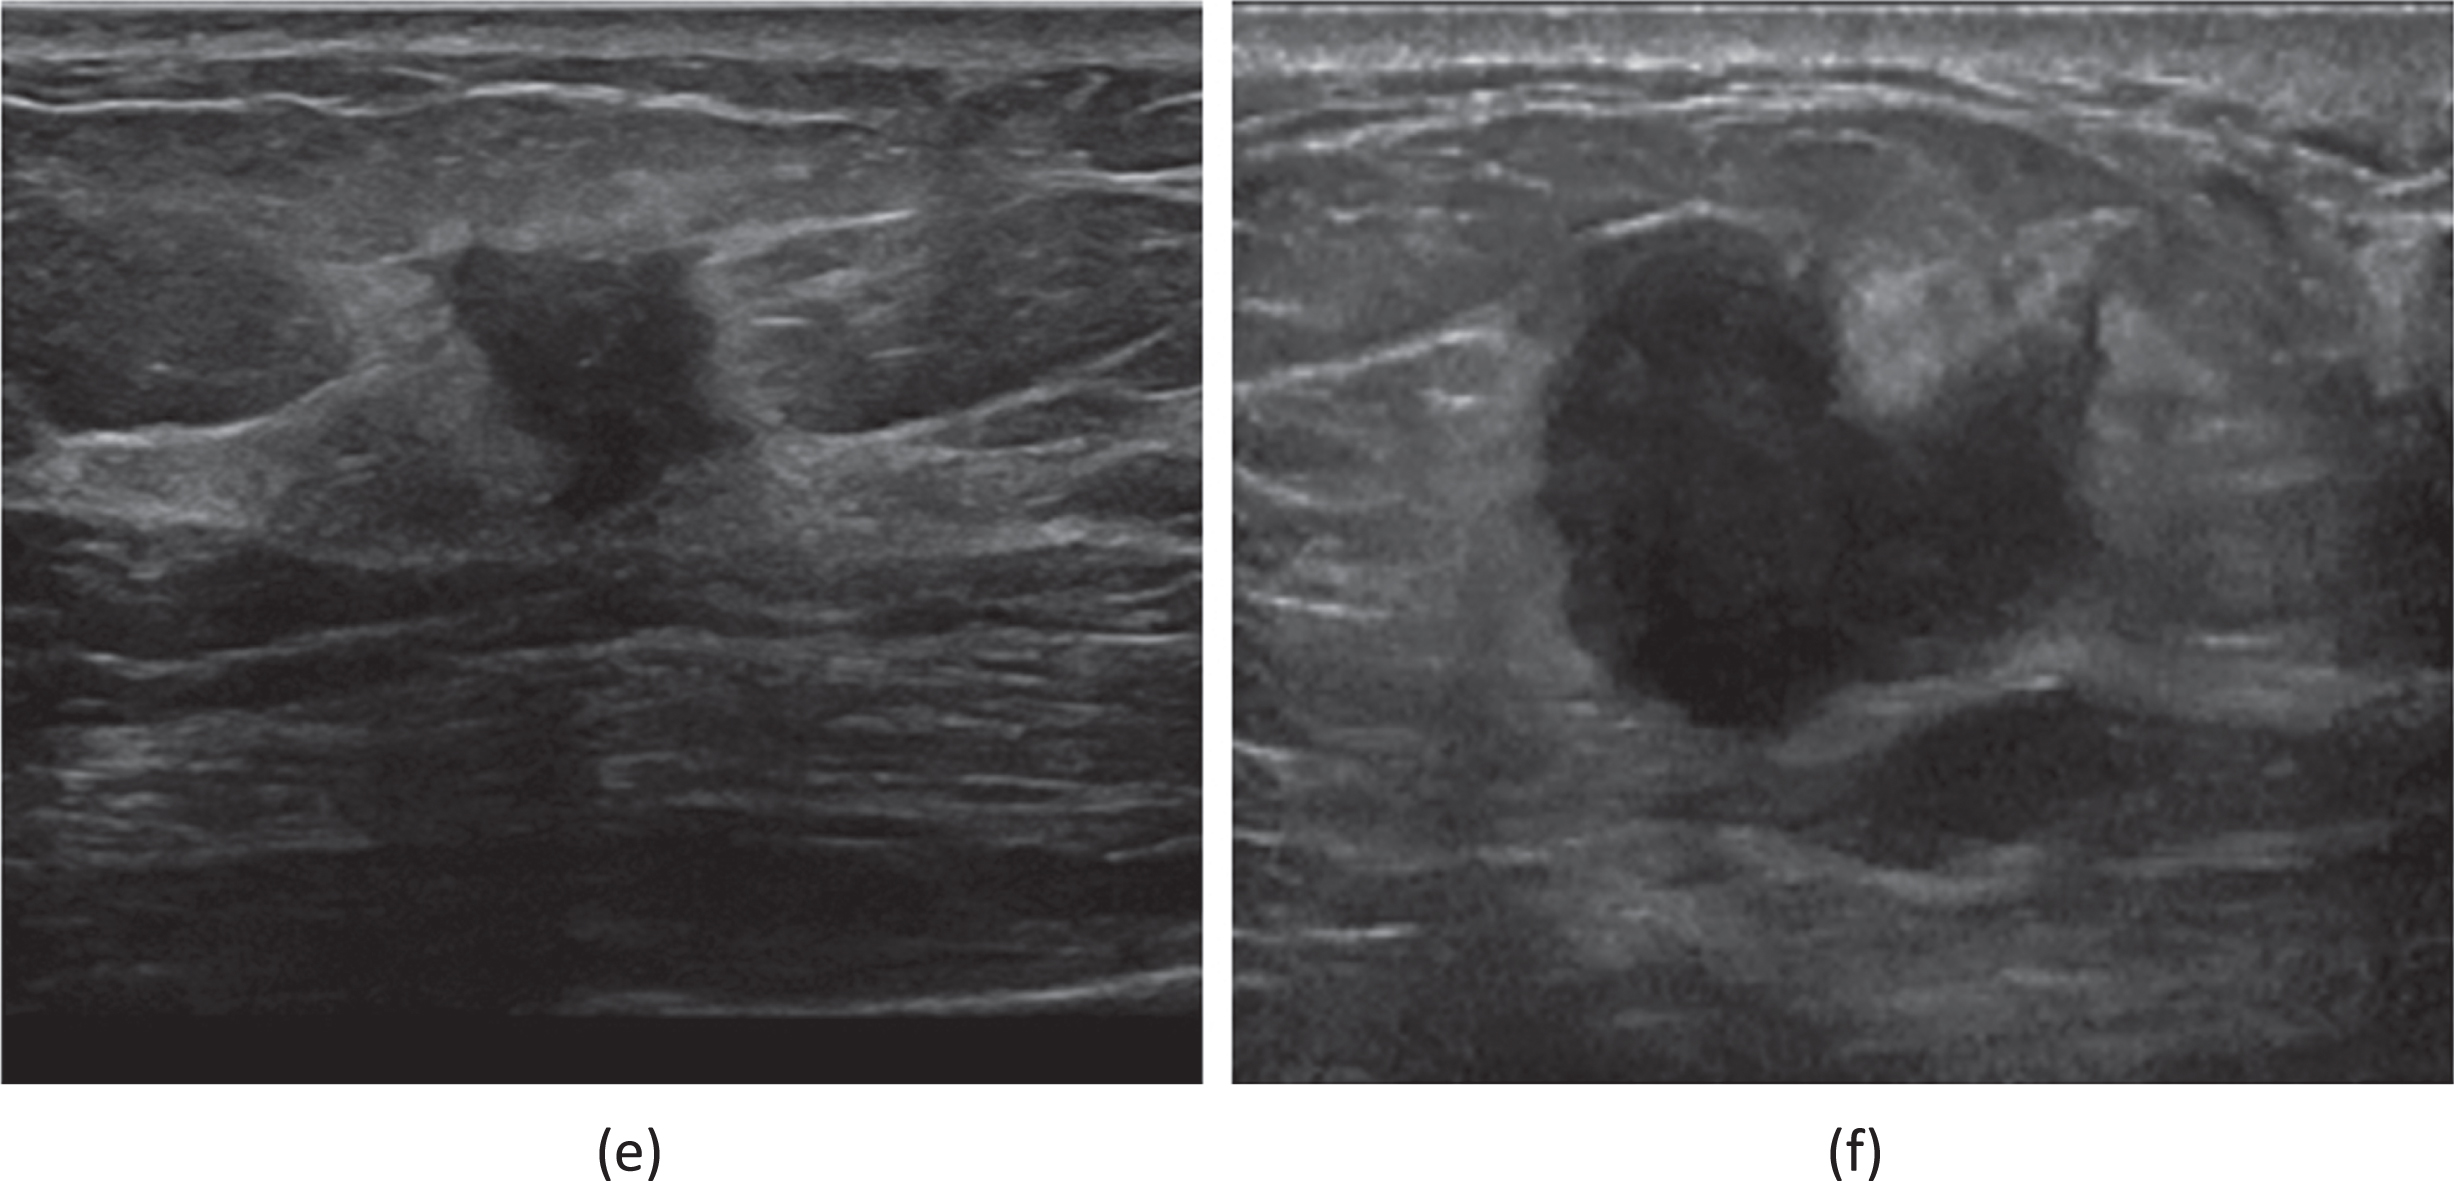 (e) A 59-year-old female patient who had been diagnosed with an invasive carcinoma in the right breast. Ultrasound of right breast showing a hypoechoic nodule with a maximum diameter of 20 mm with ill defined margins, hyperechoic halo are seen within the nodule. The patient had right axillary lymph node metastasis. Immunohistochemistry showed that ER(+80%), PR(+5%), HER2(1+), CK5/6(-), P53(+80%), Ki67(+40%), AR(+10%). (f) A 62-year-old female patient who had been diagnosed a non-special invasive carcinoma grade II in the right breast. Ultrasound of right breast showing a hypoechoic nodule with a maximum diameter of 16 mm with ill defined margins, hyperechoic halo are seen within the nodule. The patient had right axillary lymph node metastasis. Immunohistochemistry showed that ER(+80%), PR(-),Her-2(0), Ki67(+50%).